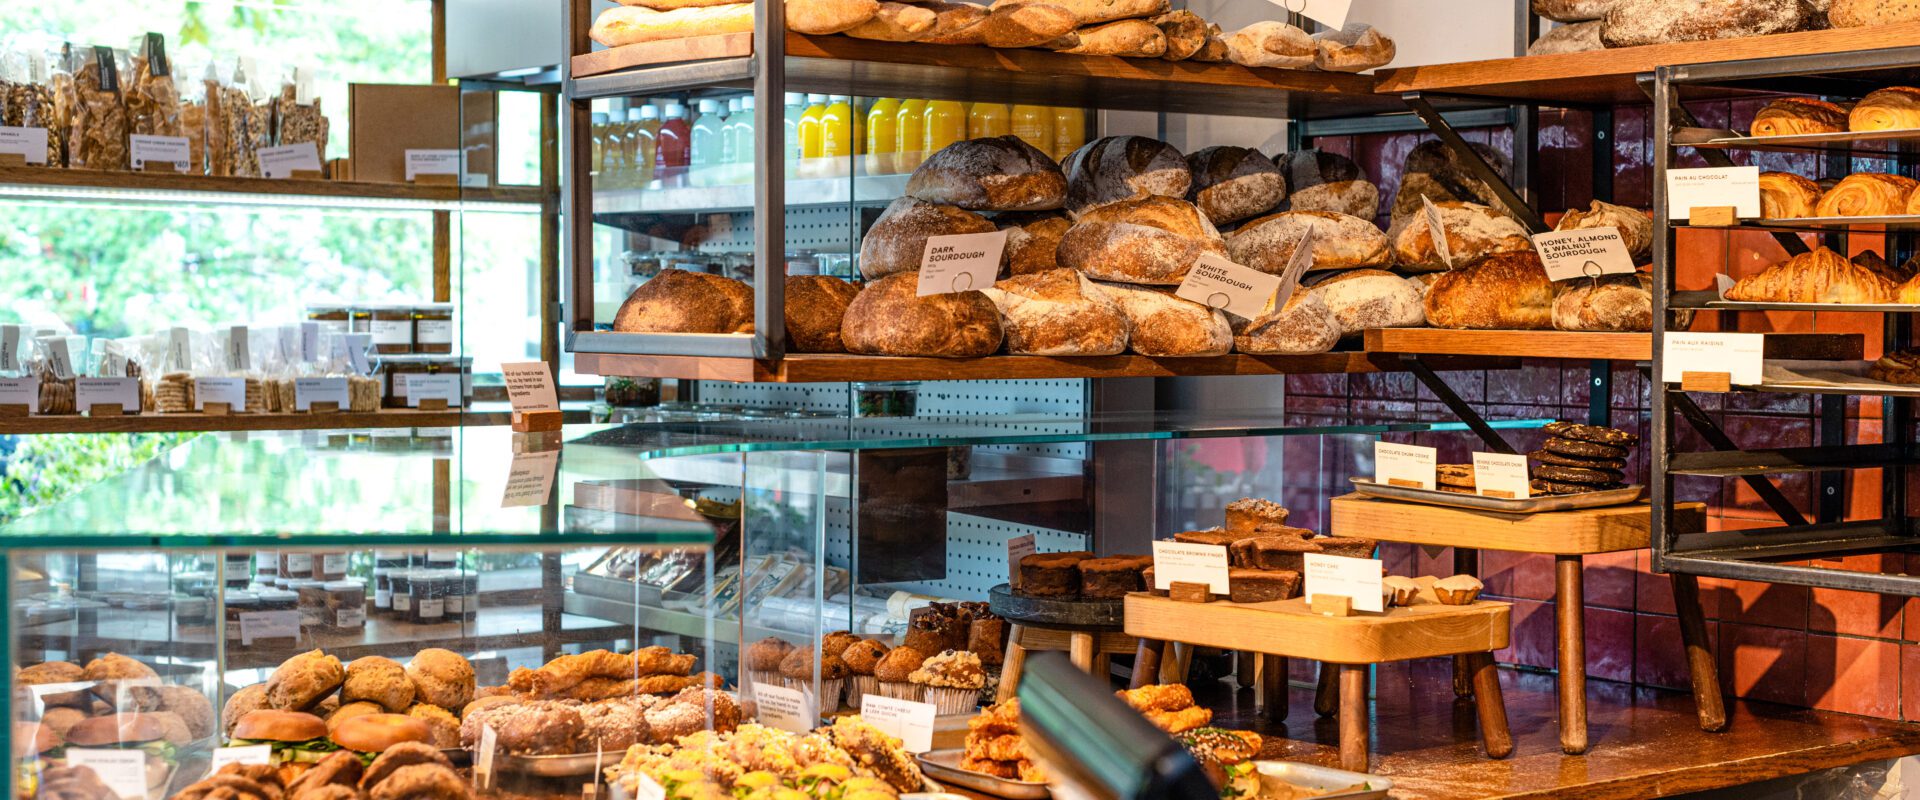 GAIL's Belsize Park fresh bread, pastries and lunches